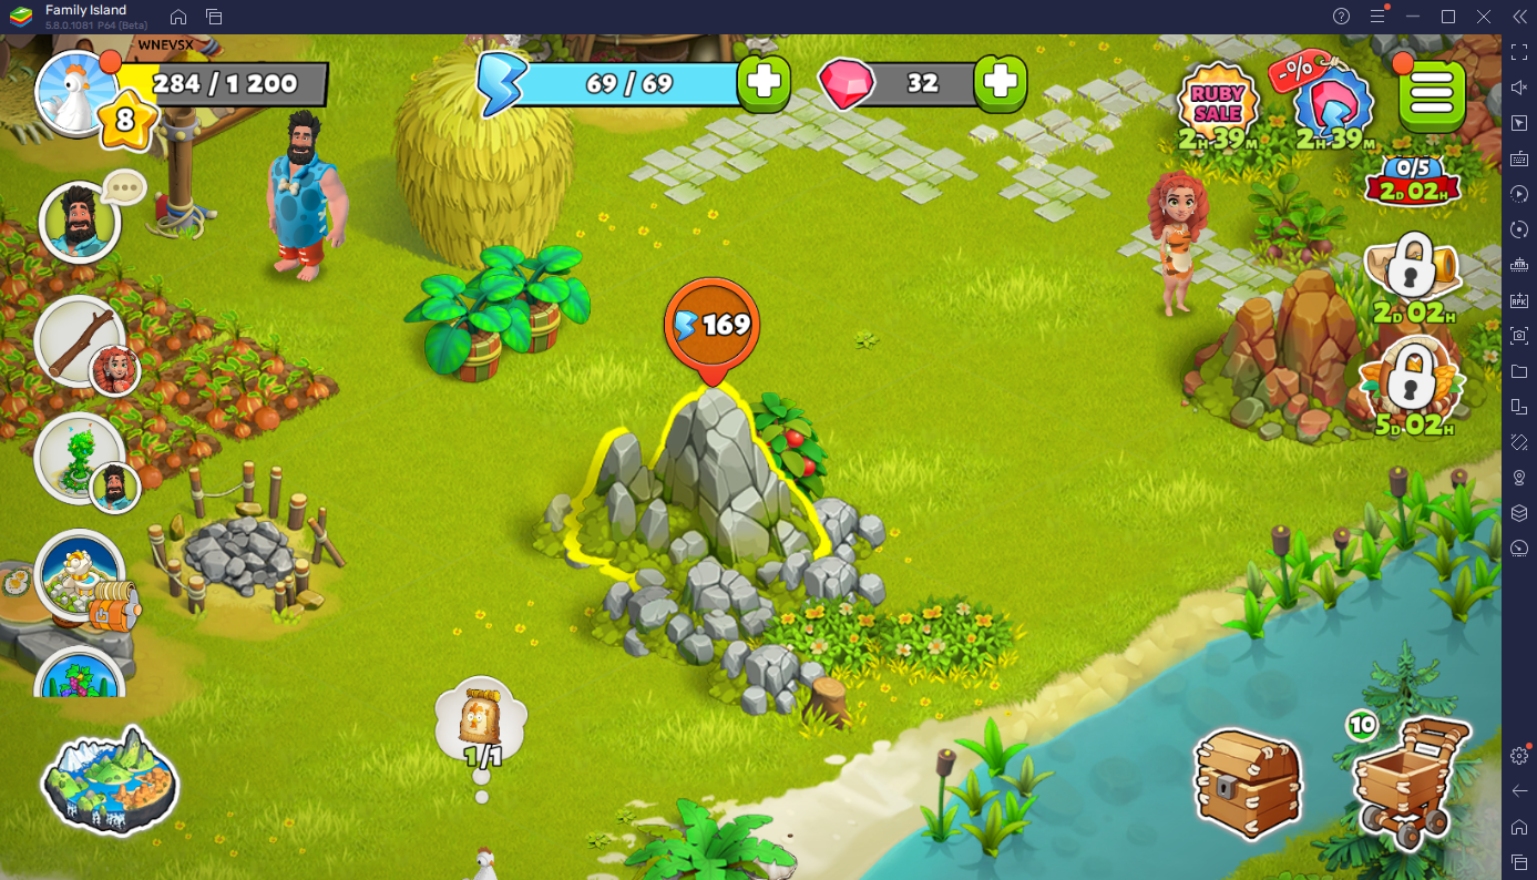 BlueStacks' Beginners Guide to Playing Family Island — Farming game